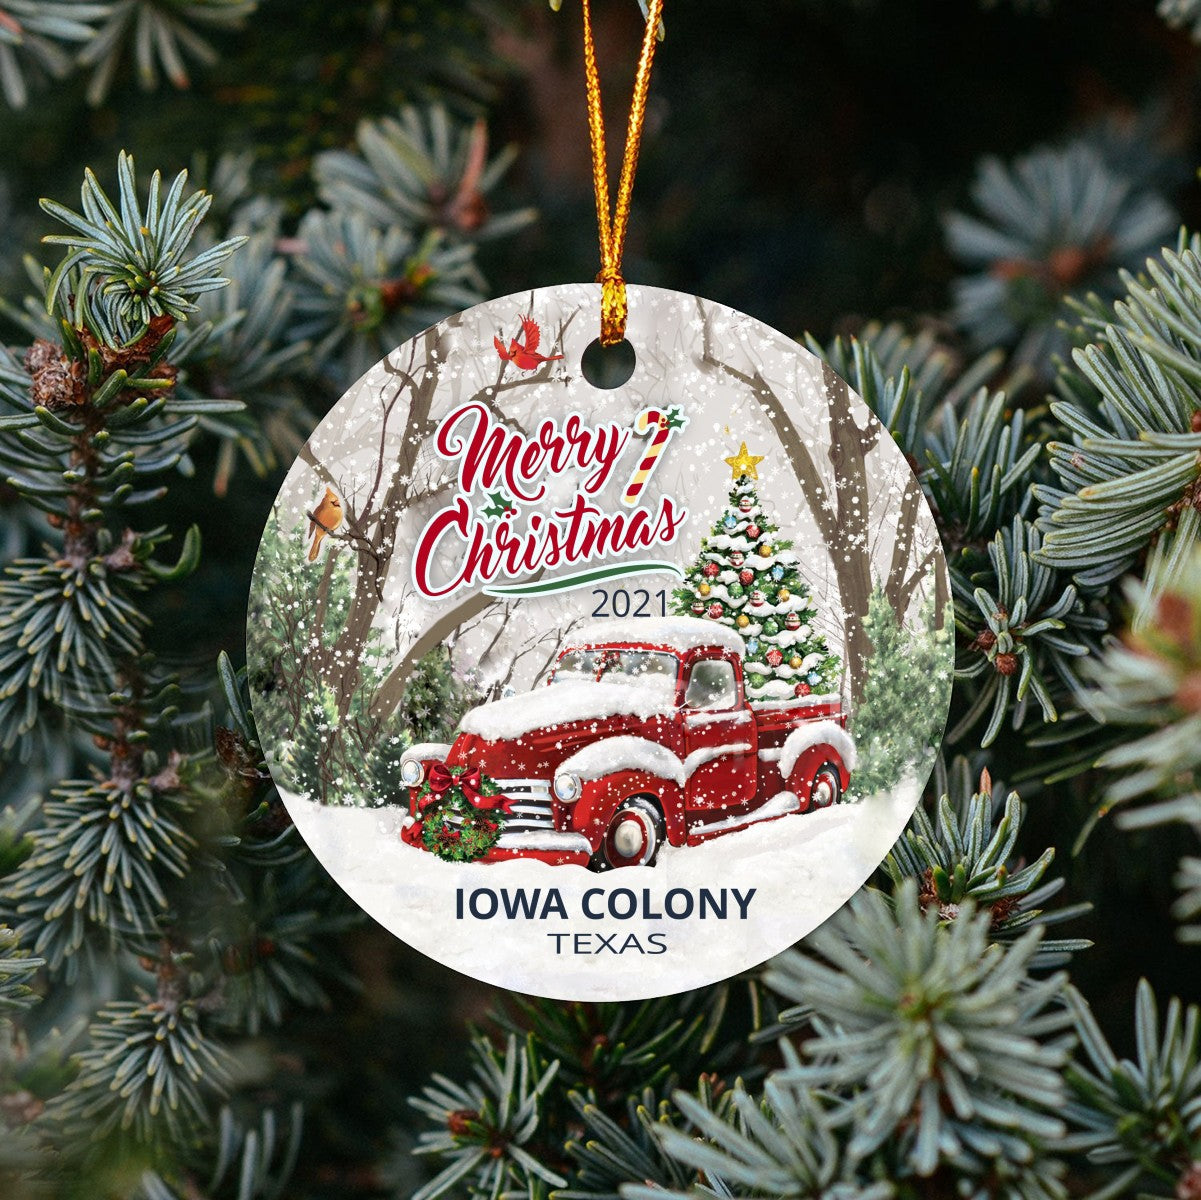 Christmas Tree Ornaments Iowa Colony - Ornament With Name City, State Iowa Colony Texas TX Ornament - Red Truck Xmas Ornaments 3'' Plastic Gift For Family, Friend And Housewarming